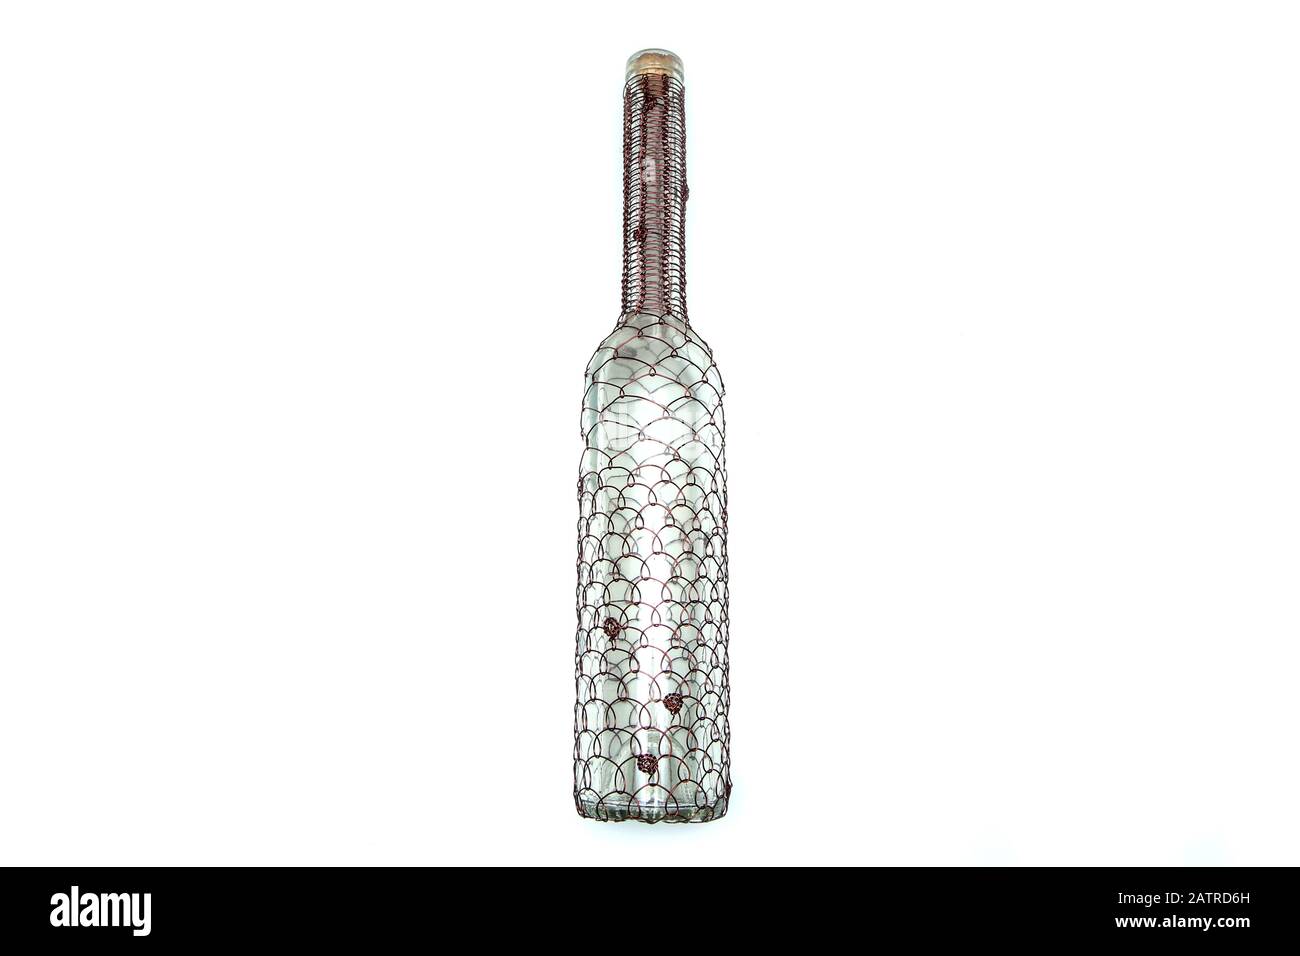 The wire brushed wine bottle.  The traditional decorative craft. In a white background. Stock Photo